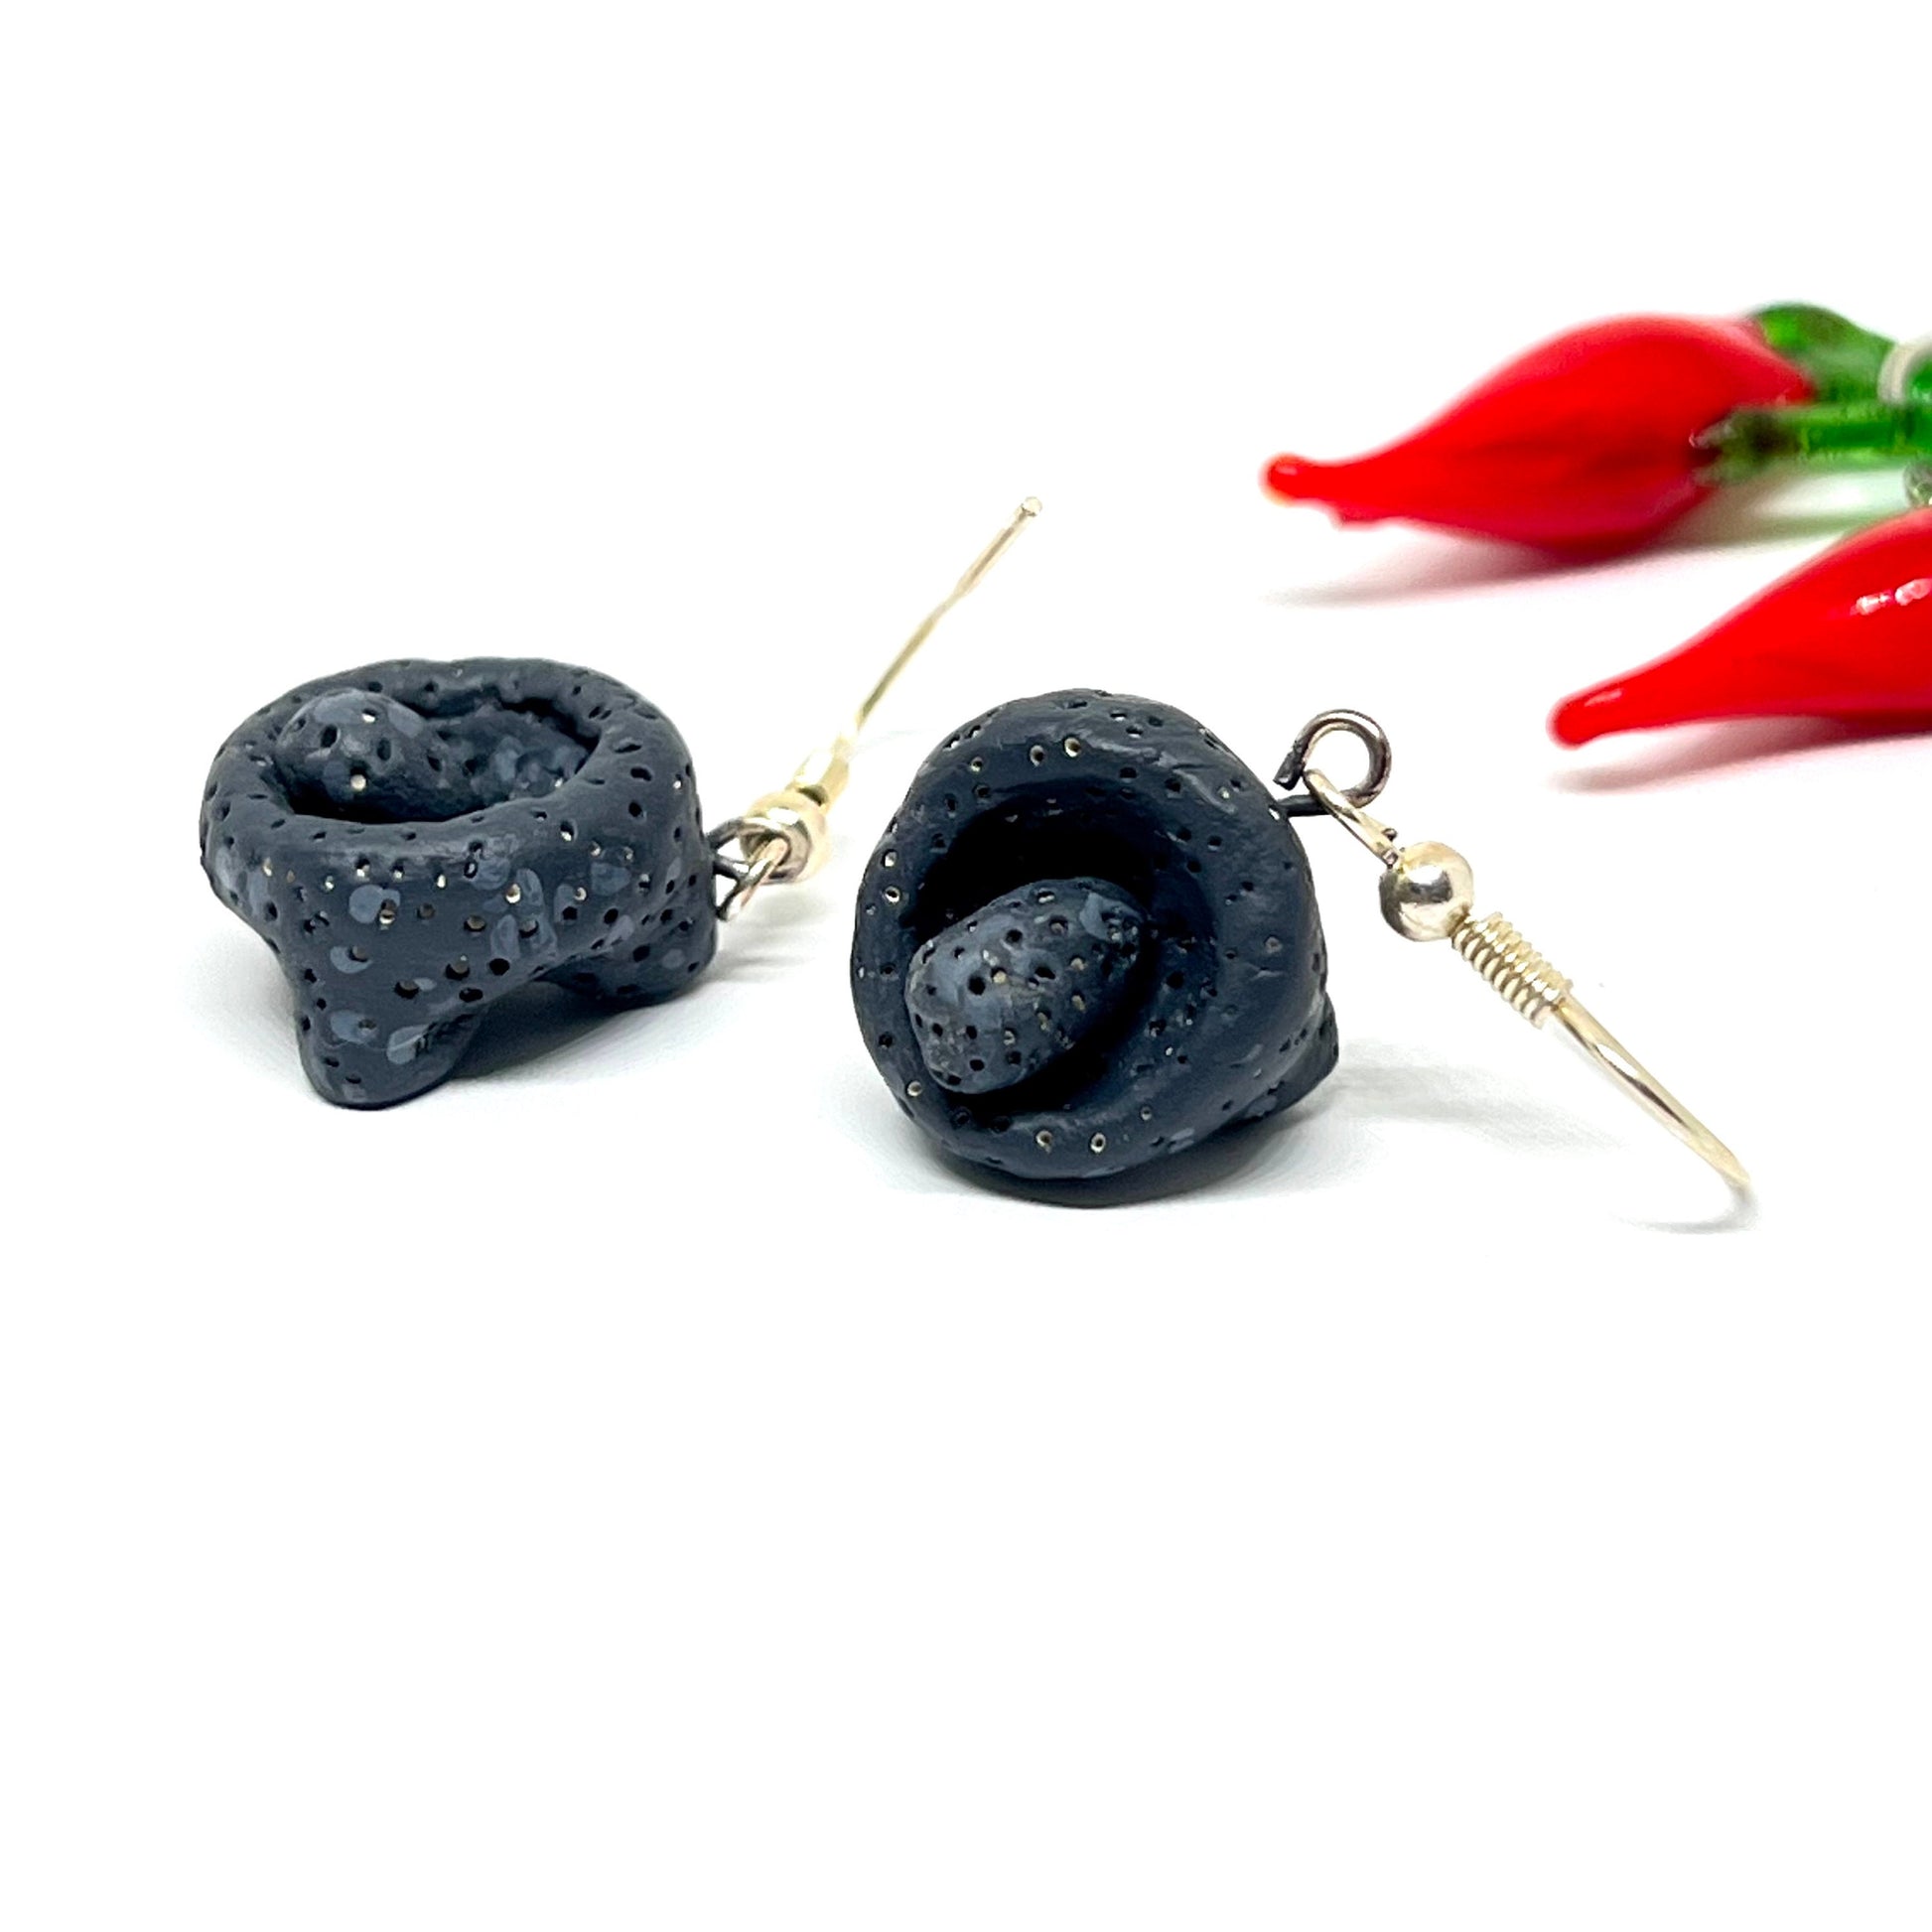 Mexican Stone Grinder Clay Earrings Molcajete Traditional Mortar Handmade Hand Painted Clay Jewelry Mexico Folk Art Women Girls Drop Dangle